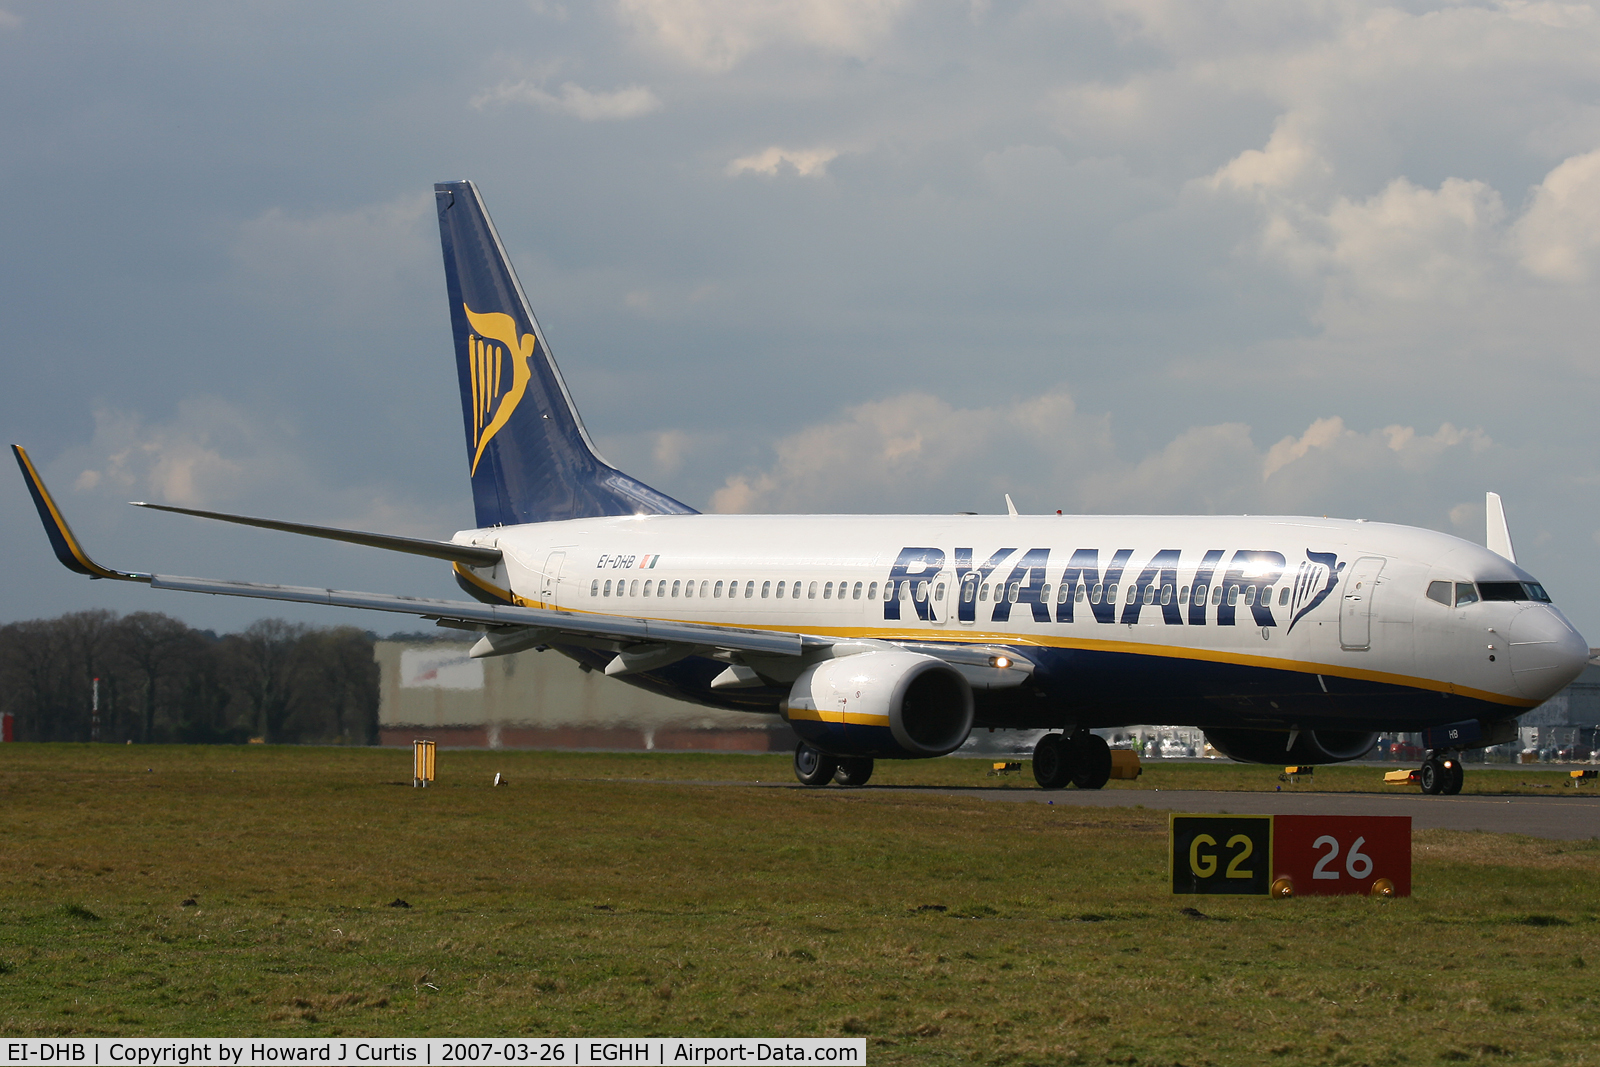 EI-DHB, 2005 Boeing 737-8AS C/N 33572, Ryanair. First in fleet without the eyebrow windows in the cockpit.